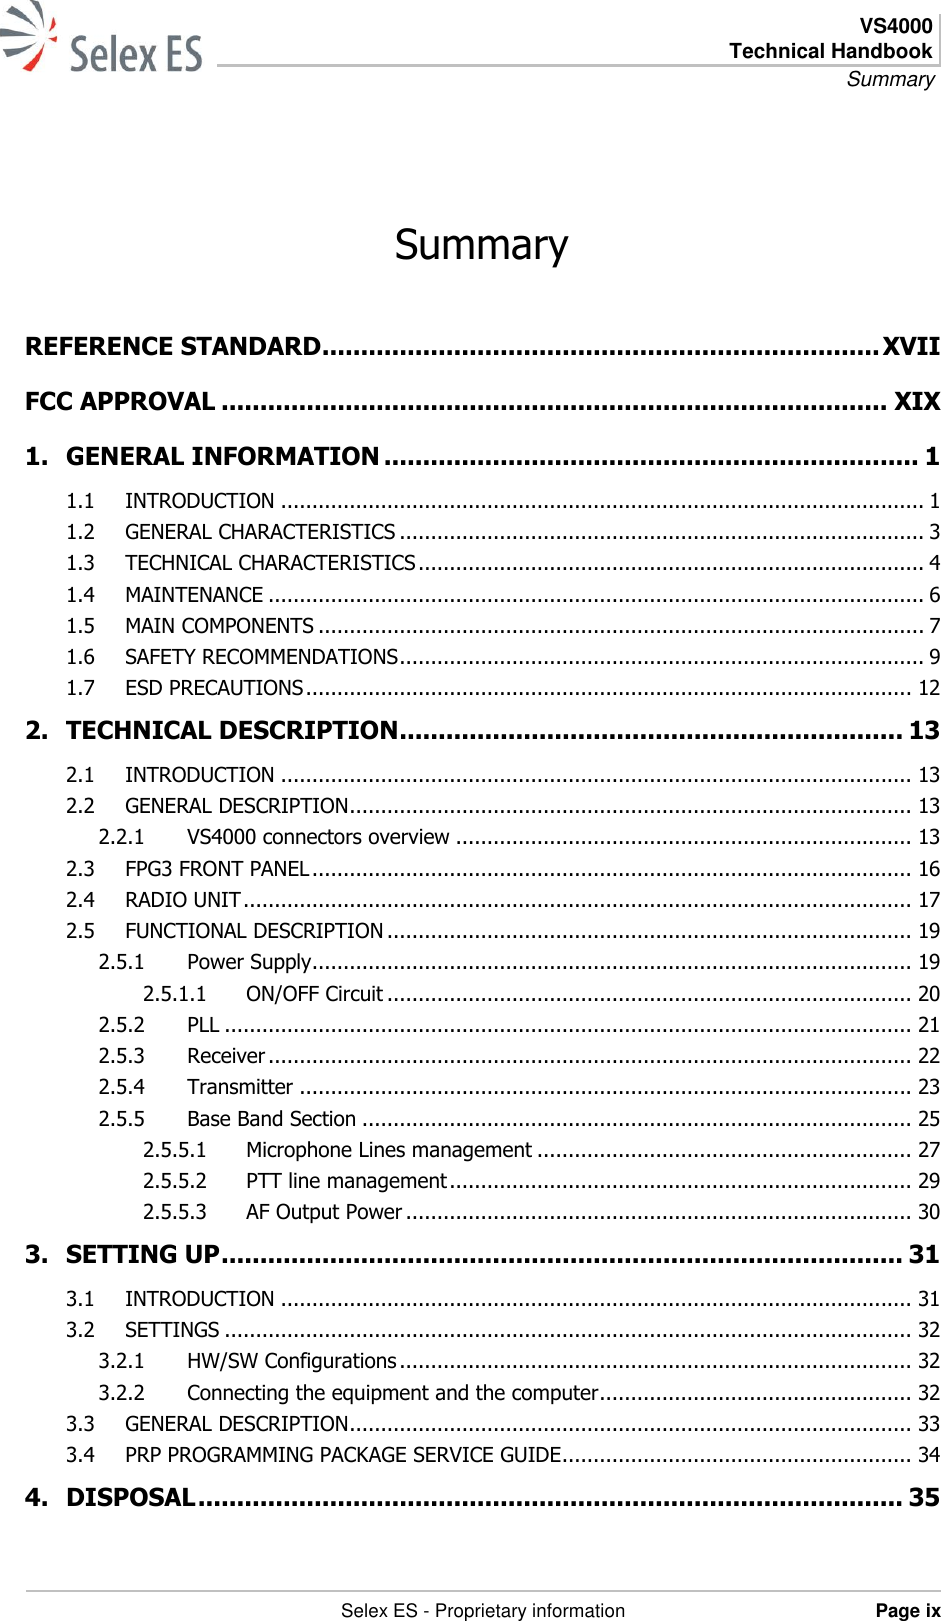  VS4000 Technical Handbook Summary   Selex ES - Proprietary information Page ix  Summary REFERENCE STANDARD ........................................................................ XVII FCC APPROVAL ...................................................................................... XIX 1. GENERAL INFORMATION ..................................................................... 1 1.1 INTRODUCTION ....................................................................................................... 1 1.2 GENERAL CHARACTERISTICS .................................................................................... 3 1.3 TECHNICAL CHARACTERISTICS ................................................................................. 4 1.4 MAINTENANCE ......................................................................................................... 6 1.5 MAIN COMPONENTS ................................................................................................. 7 1.6 SAFETY RECOMMENDATIONS .................................................................................... 9 1.7 ESD PRECAUTIONS ................................................................................................. 12 2. TECHNICAL DESCRIPTION ................................................................. 13 2.1 INTRODUCTION ..................................................................................................... 13 2.2 GENERAL DESCRIPTION .......................................................................................... 13 2.2.1 VS4000 connectors overview ......................................................................... 13 2.3 FPG3 FRONT PANEL ................................................................................................ 16 2.4 RADIO UNIT ........................................................................................................... 17 2.5 FUNCTIONAL DESCRIPTION .................................................................................... 19 2.5.1 Power Supply ................................................................................................ 19 2.5.1.1 ON/OFF Circuit .................................................................................... 20 2.5.2 PLL .............................................................................................................. 21 2.5.3 Receiver ....................................................................................................... 22 2.5.4 Transmitter .................................................................................................. 23 2.5.5 Base Band Section ........................................................................................ 25 2.5.5.1 Microphone Lines management ............................................................ 27 2.5.5.2 PTT line management .......................................................................... 29 2.5.5.3 AF Output Power ................................................................................. 30 3. SETTING UP ........................................................................................ 31 3.1 INTRODUCTION ..................................................................................................... 31 3.2 SETTINGS .............................................................................................................. 32 3.2.1 HW/SW Configurations .................................................................................. 32 3.2.2 Connecting the equipment and the computer .................................................. 32 3.3 GENERAL DESCRIPTION .......................................................................................... 33 3.4 PRP PROGRAMMING PACKAGE SERVICE GUIDE ........................................................ 34 4. DISPOSAL ........................................................................................... 35 